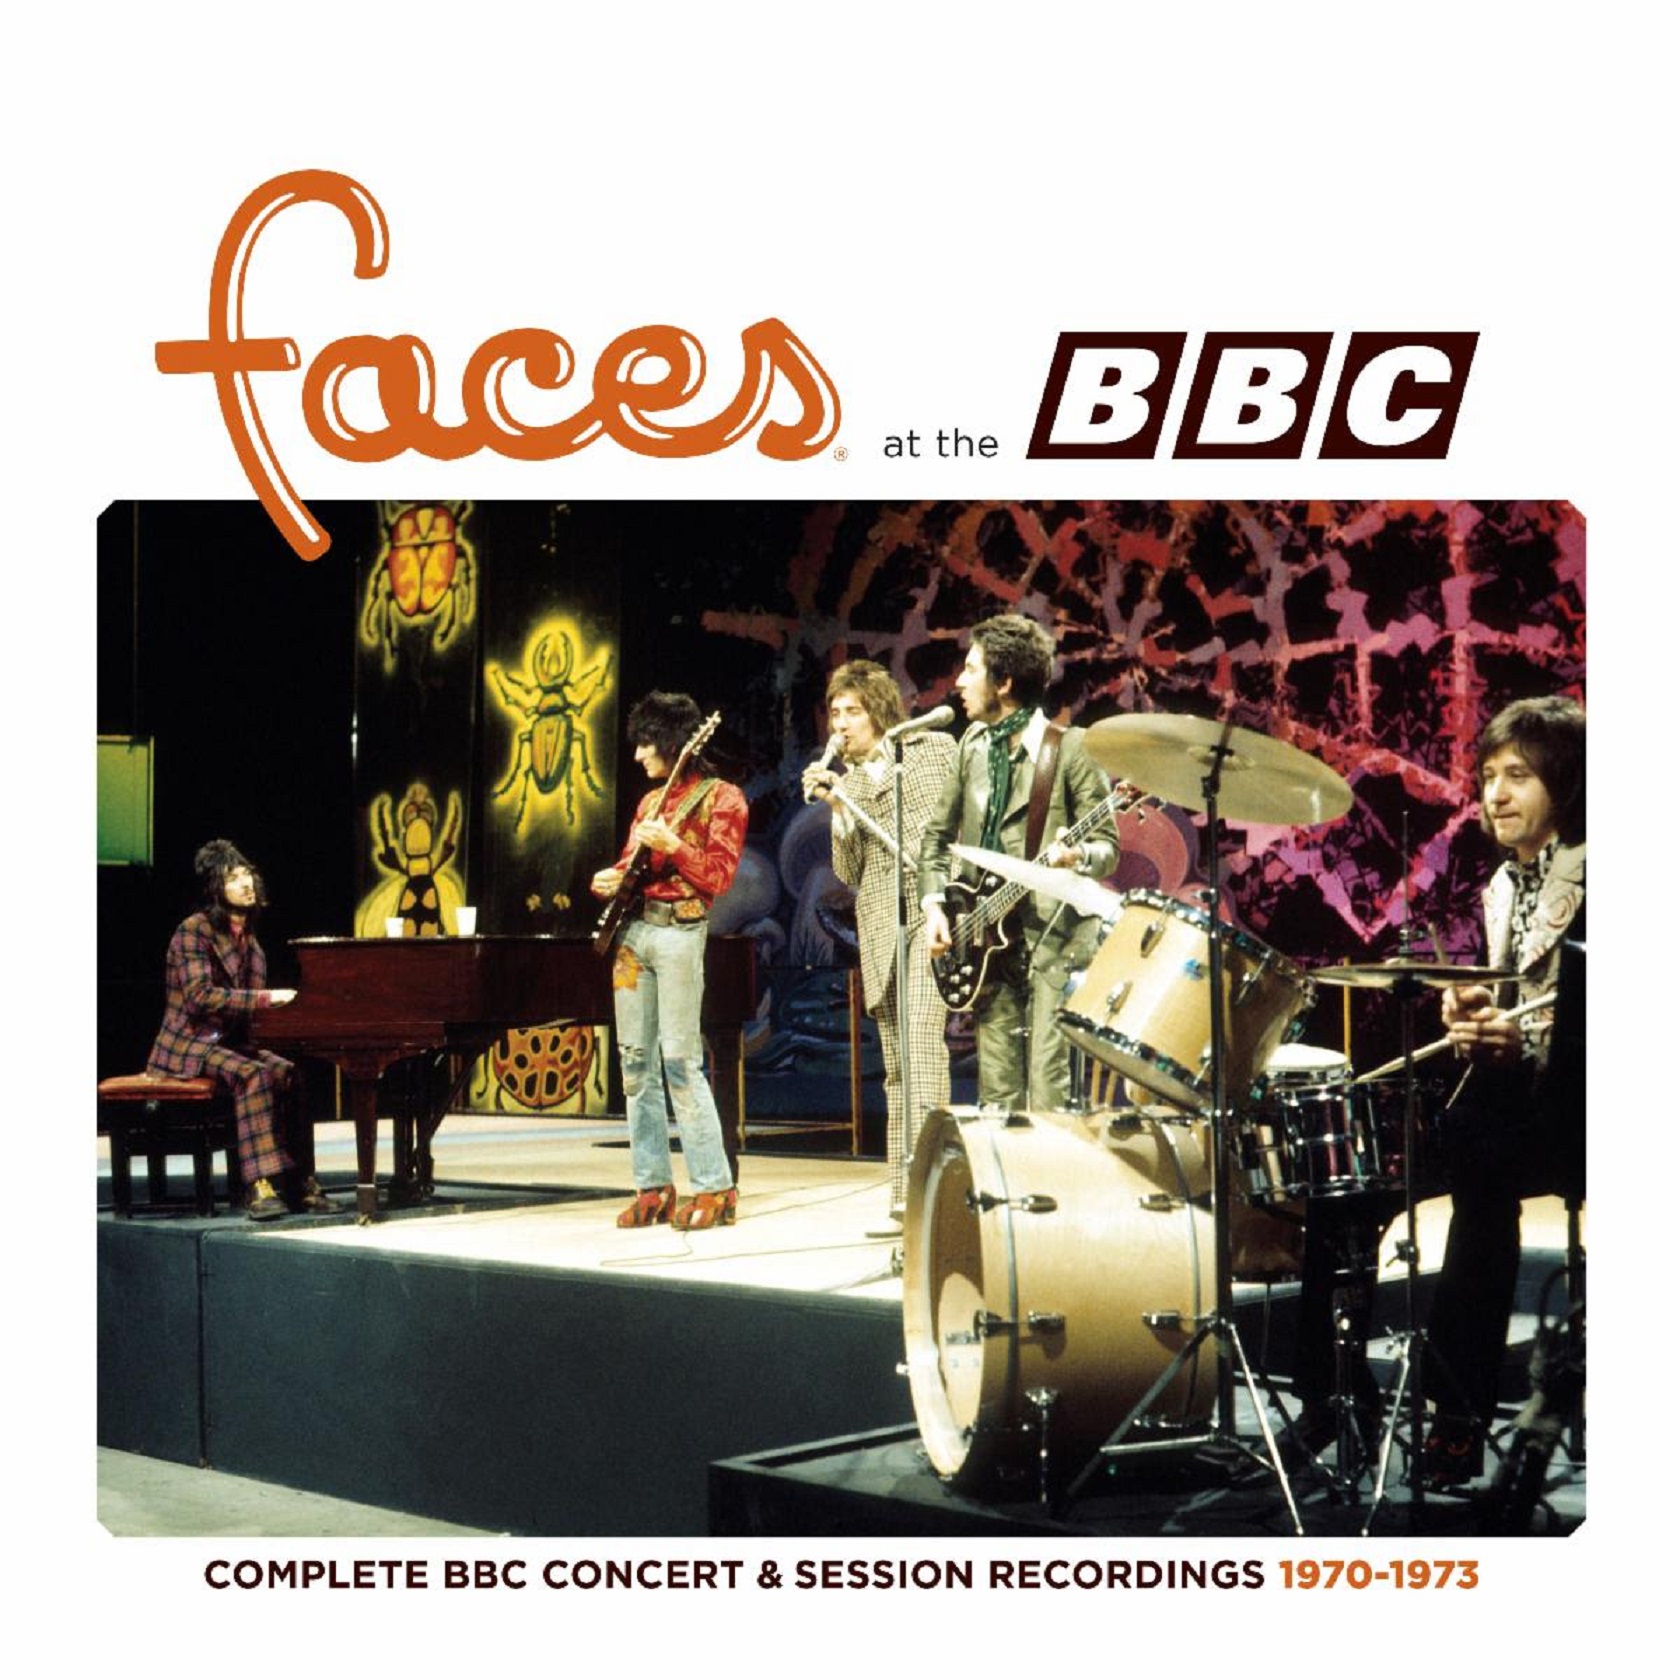 Faces’ once lost BBC sessions recovered & remastered, due out Sept 6